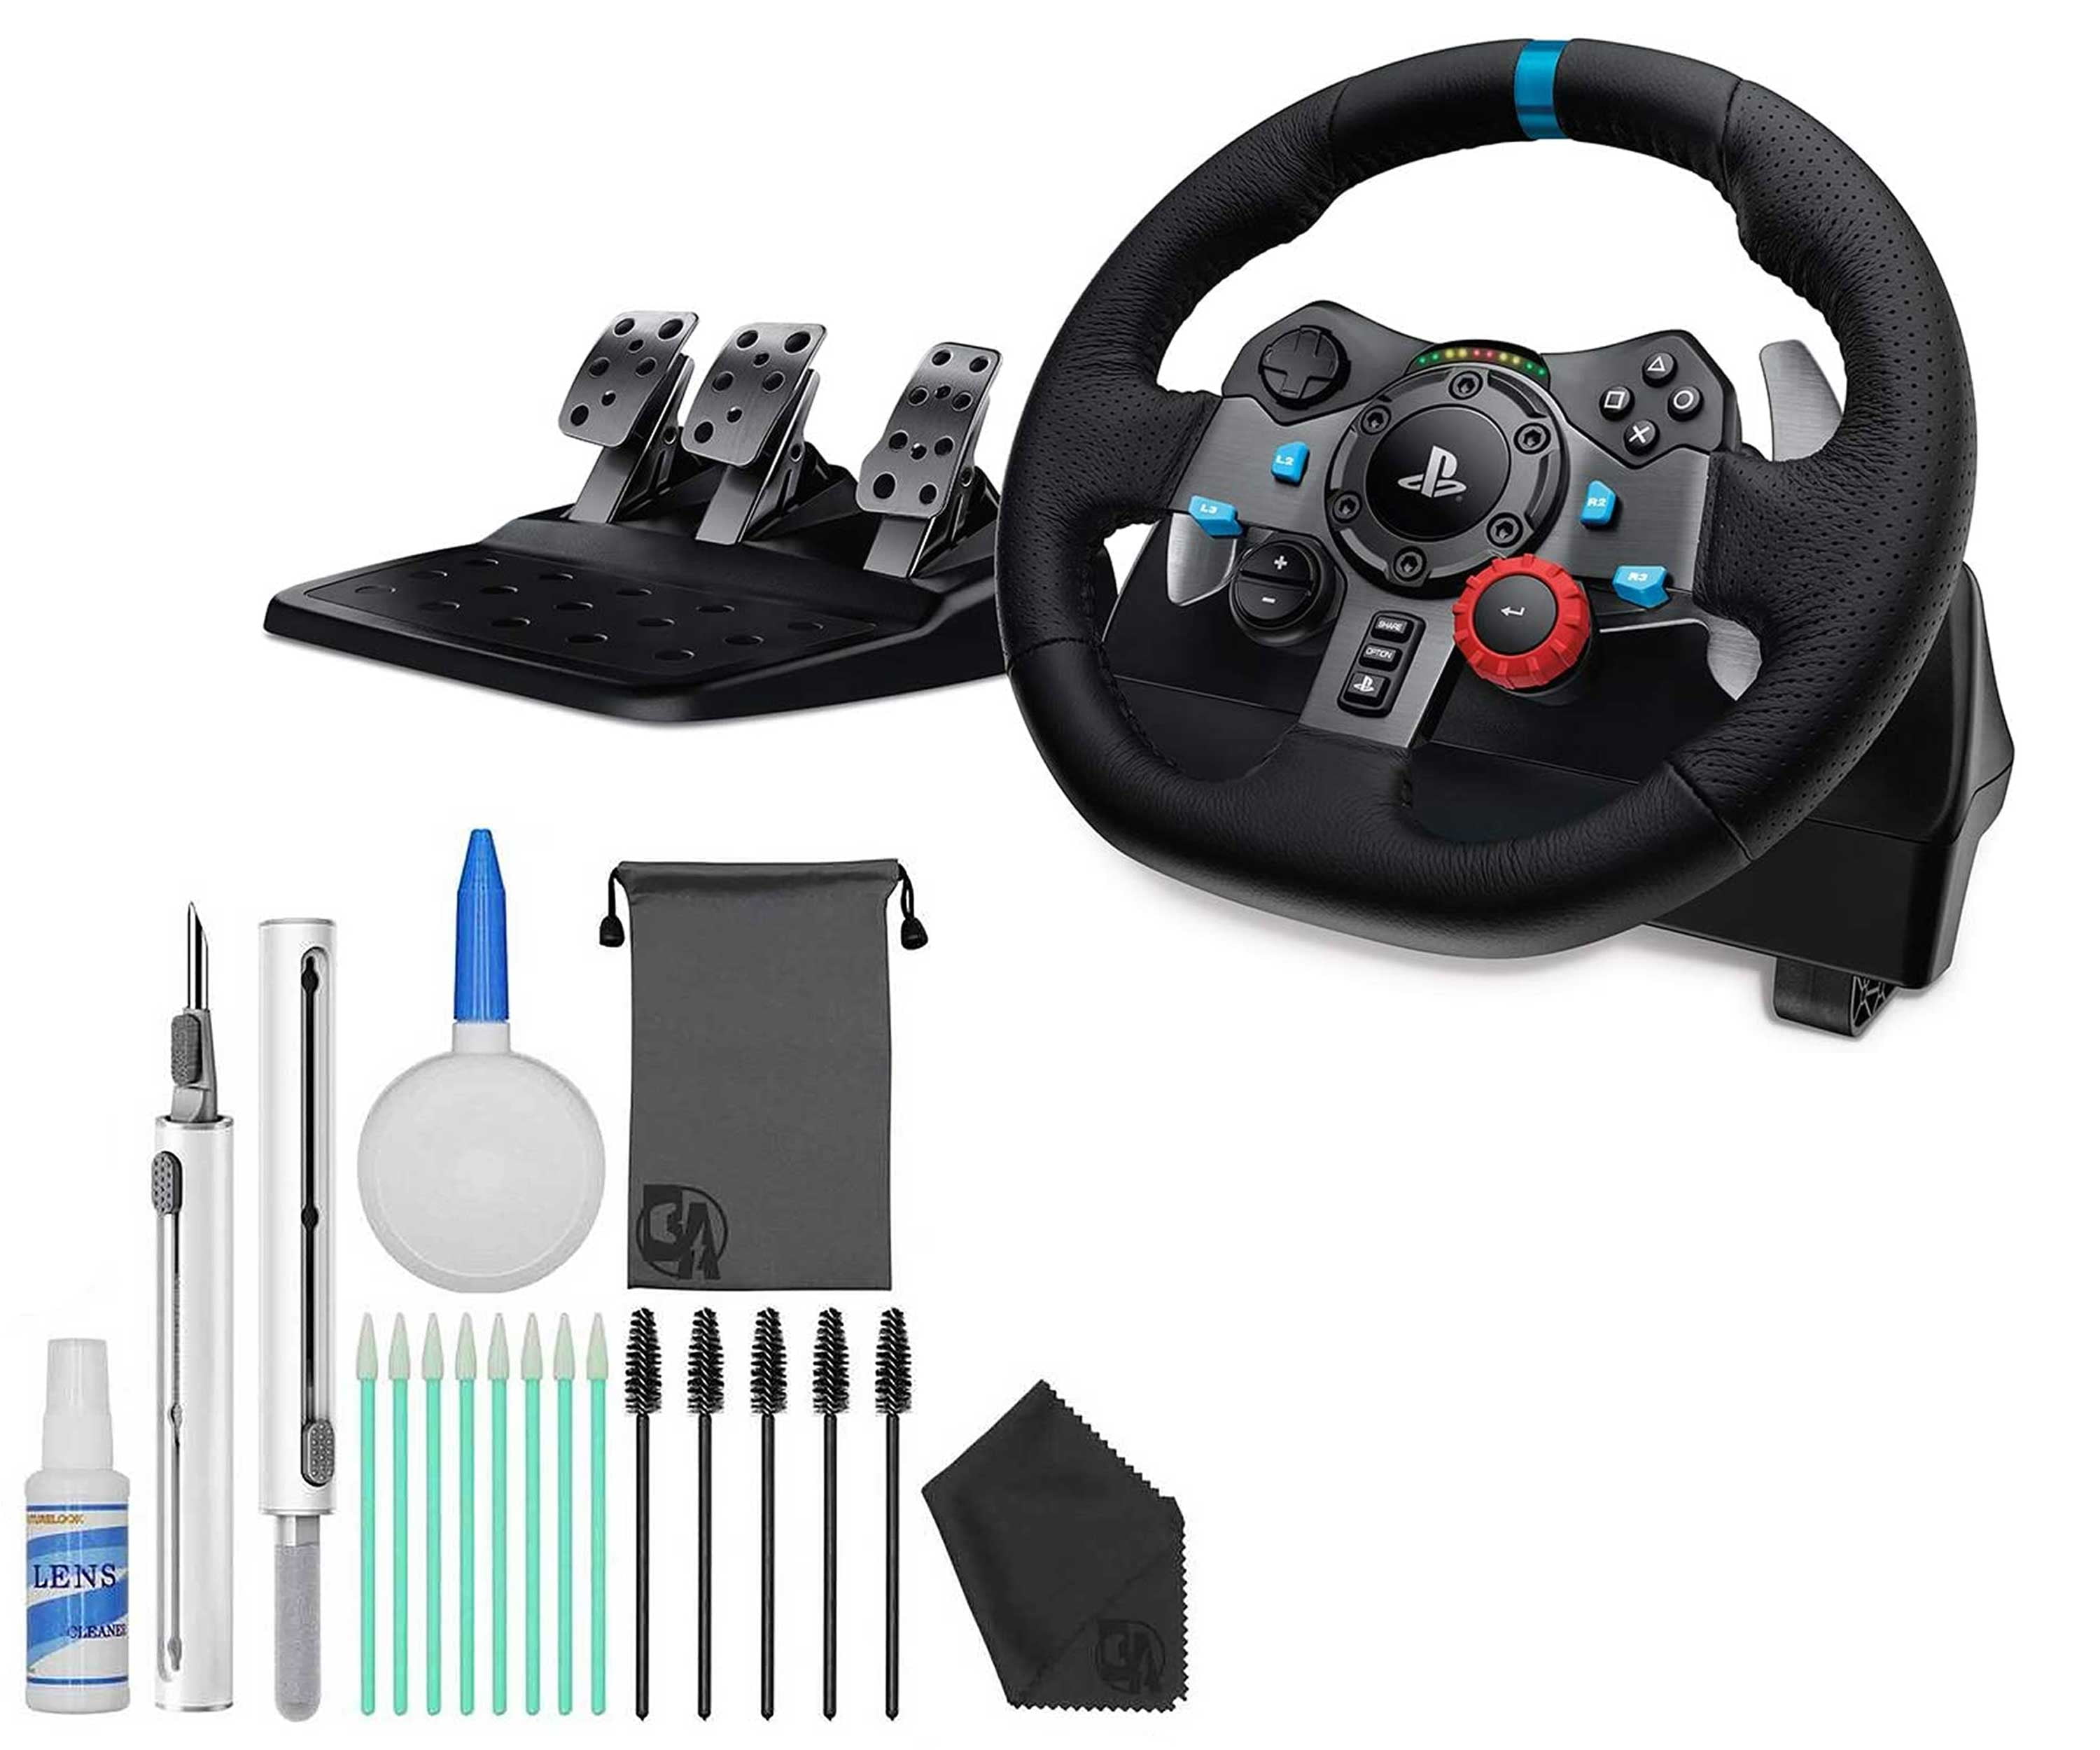 Logitech G29 Driving Force Racing Wheel and Floor Pedals,, Stainless Steel  Paddle Shifters, Leather Steering Wheel Cover for PS5, PS4, PC, Mac Like